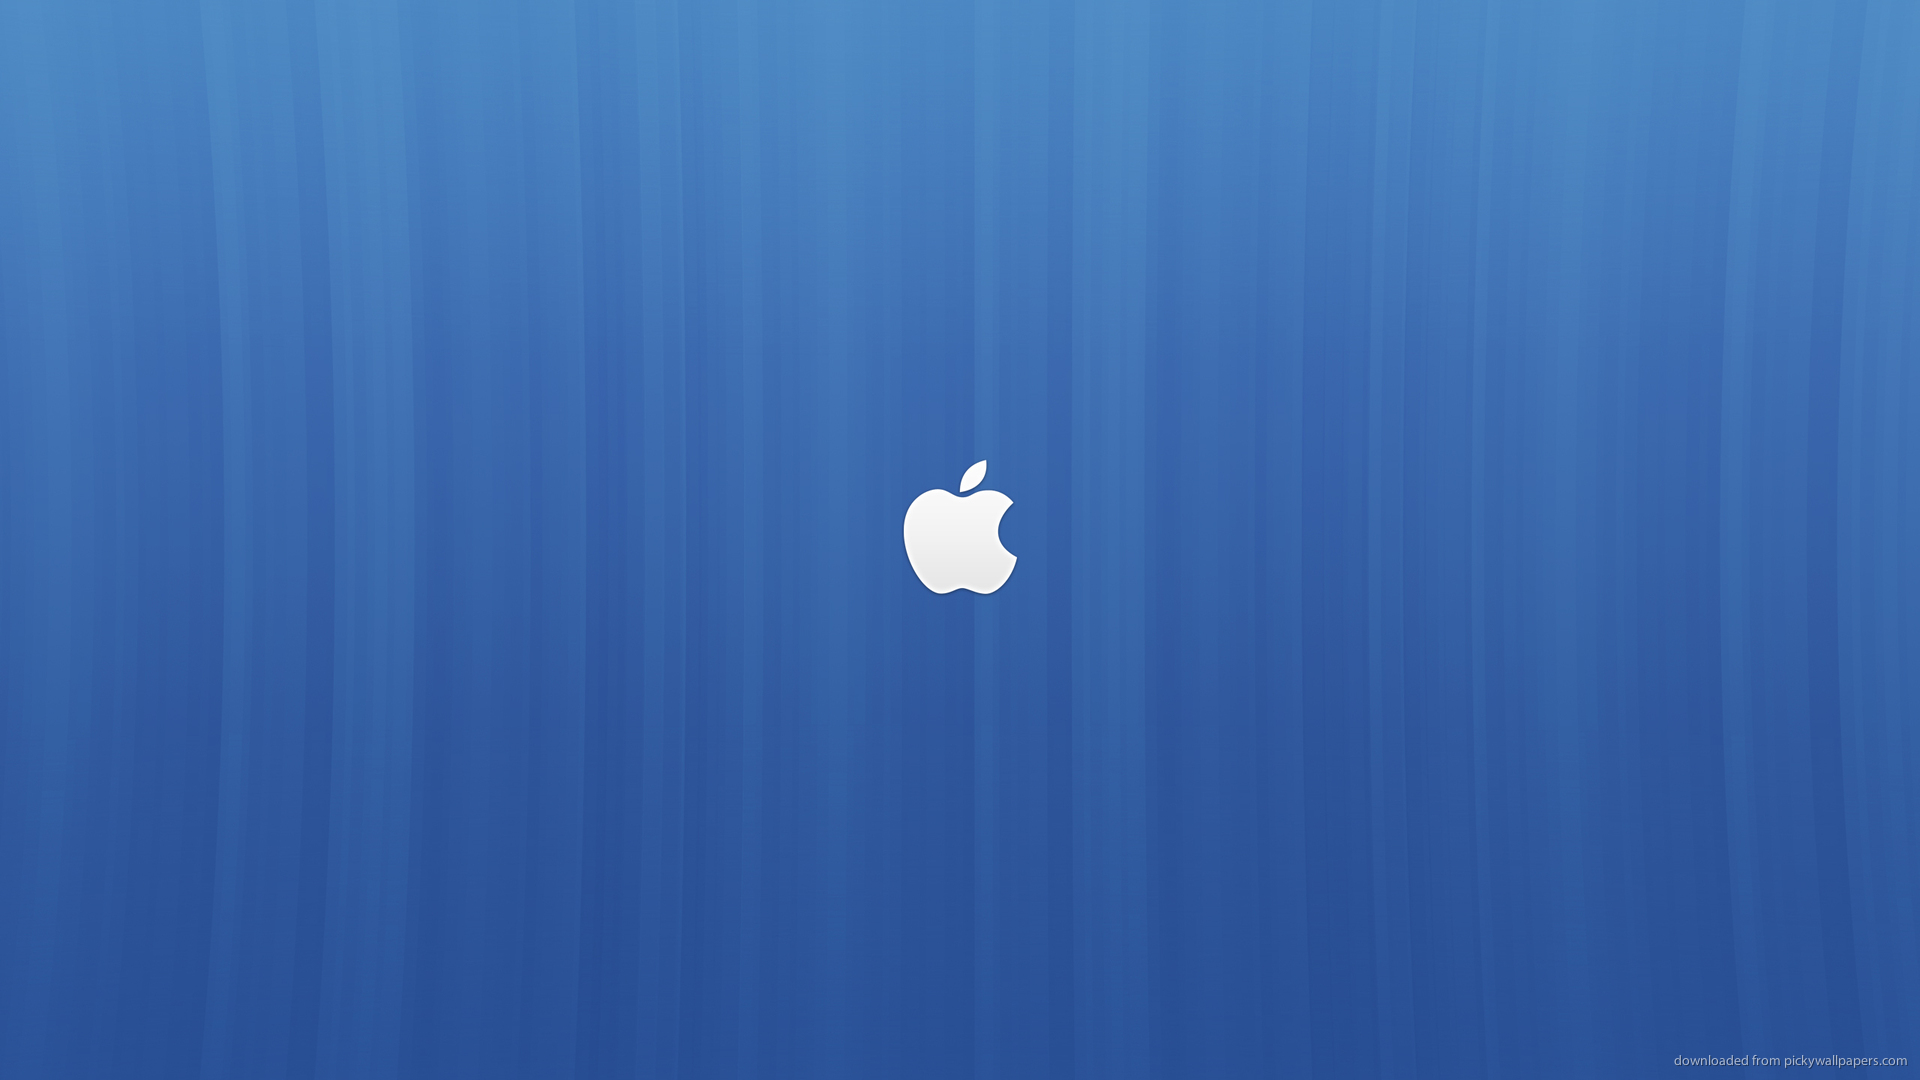 apple blue background logo wallpapers wallpaper computers